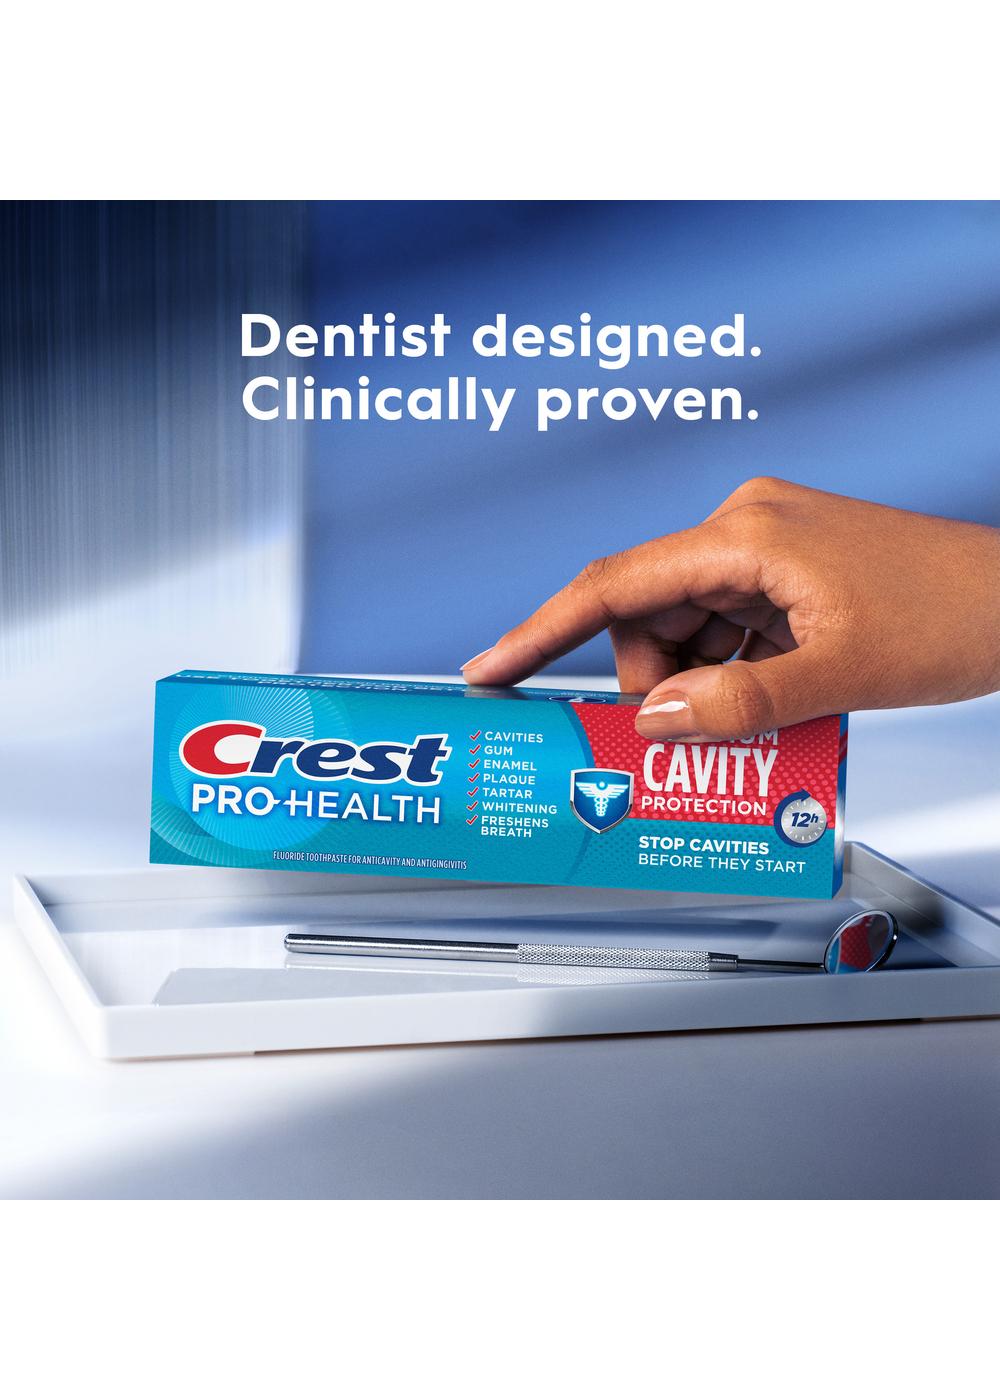 Crest Pro-Health Maximum Cavity Protection Toothpaste; image 7 of 9